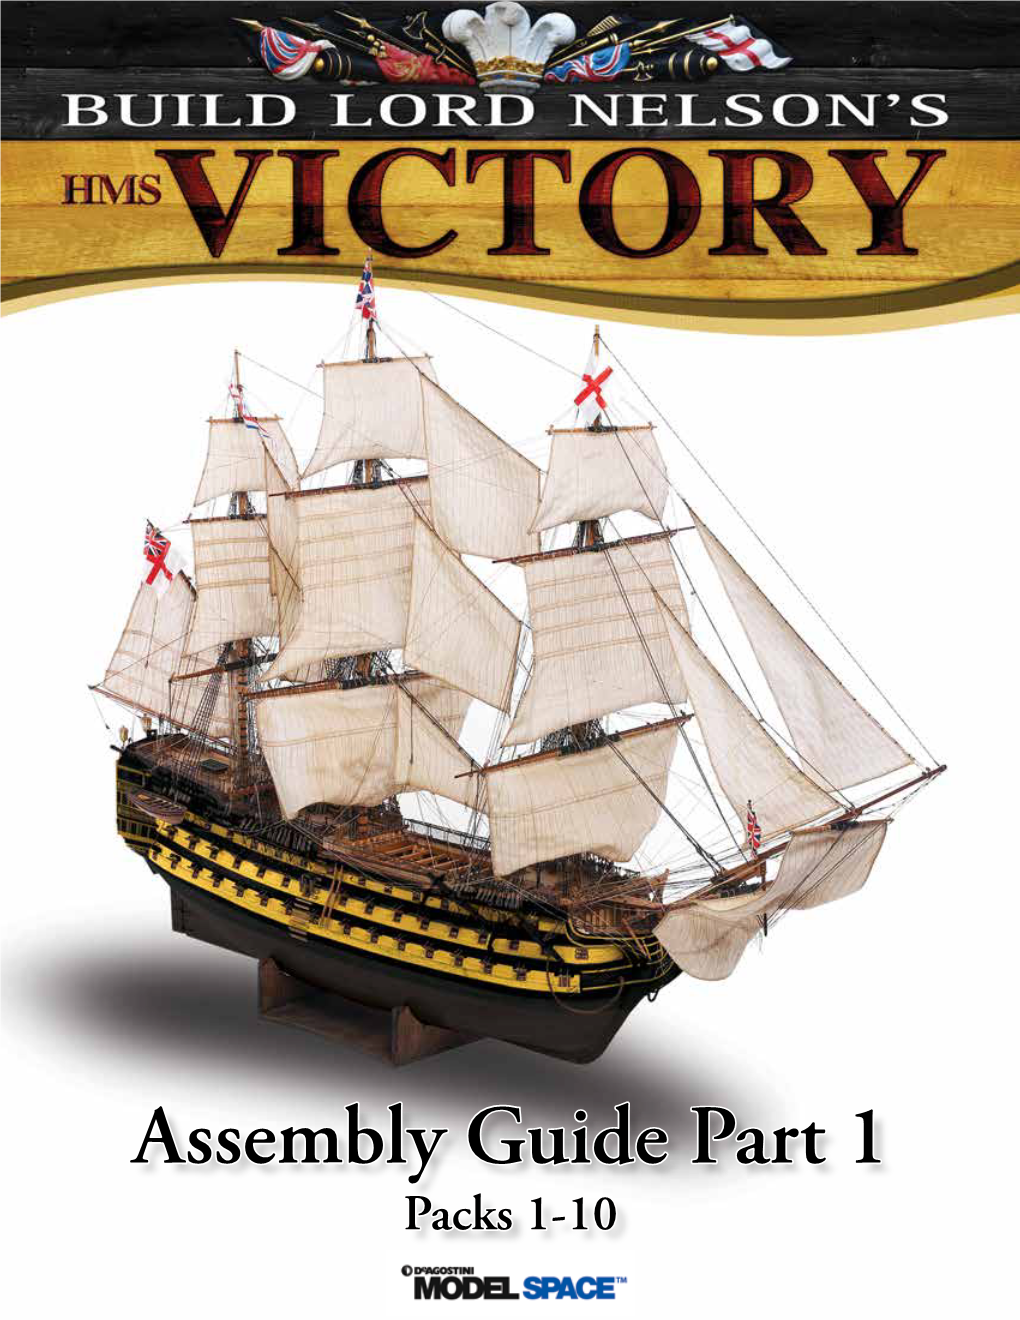 Assembly Guide Part 1 Packs 1-10